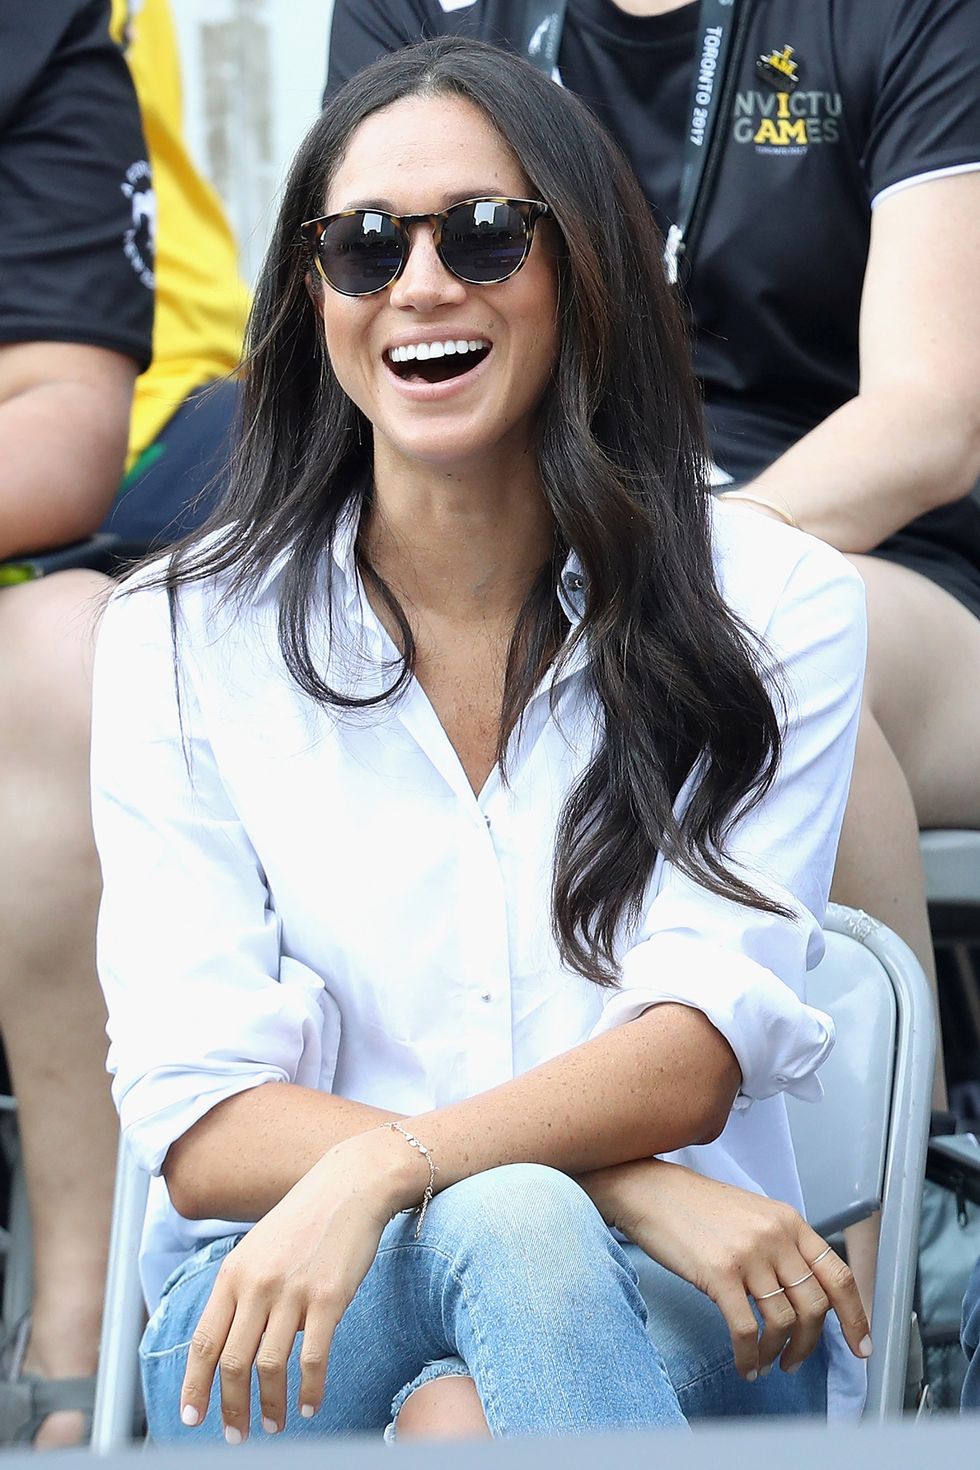 Meghan Markle at the Invictus Games